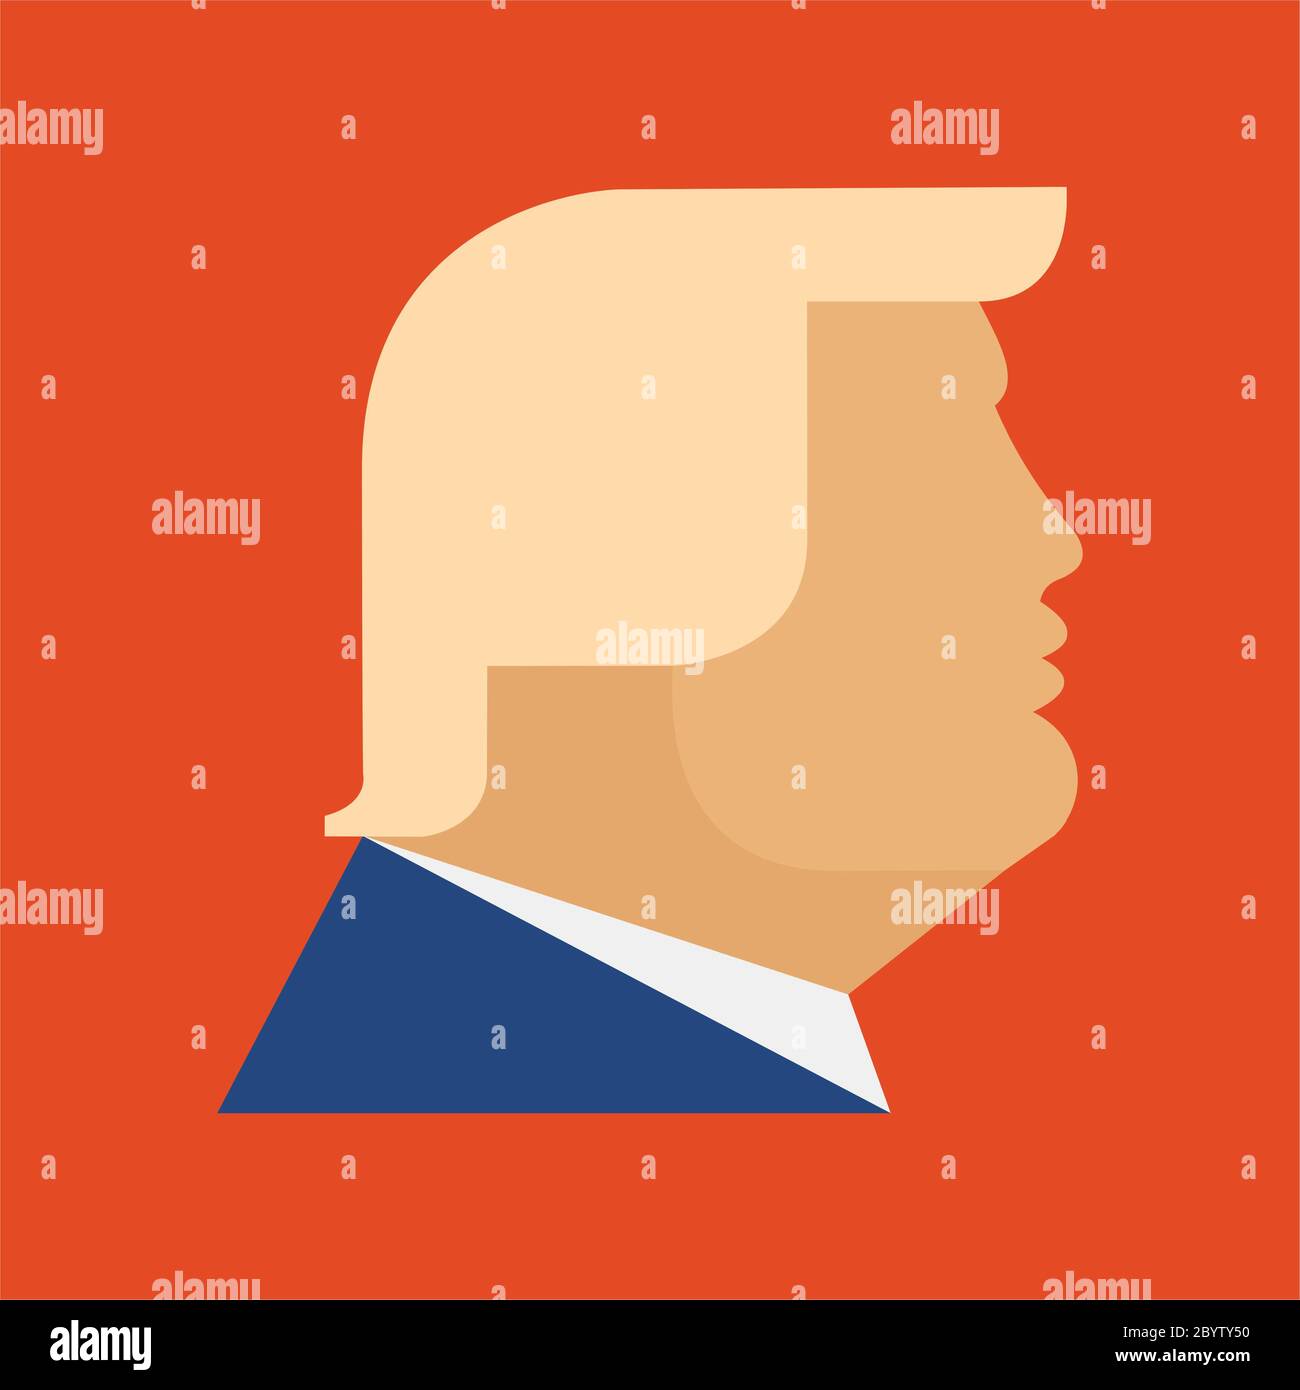 June 8, 2020: Donald Trump President of the United States, portrait orange face hair clip art icon, isolated, red background, Republican candidate pol Stock Photo